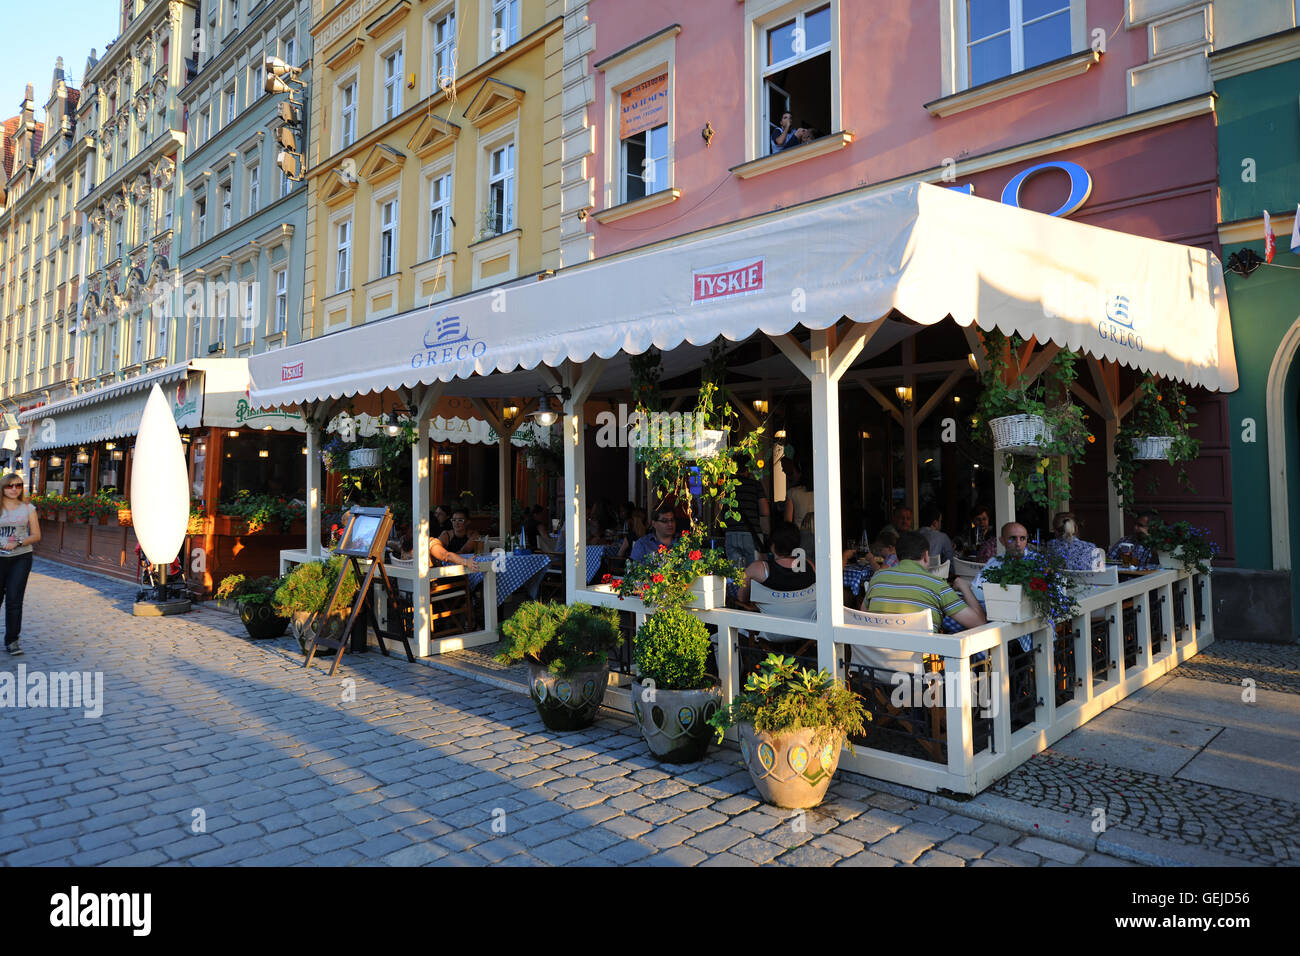 Restaurants in the medieval Market Square, Wroclaw, Poland Stock Photo